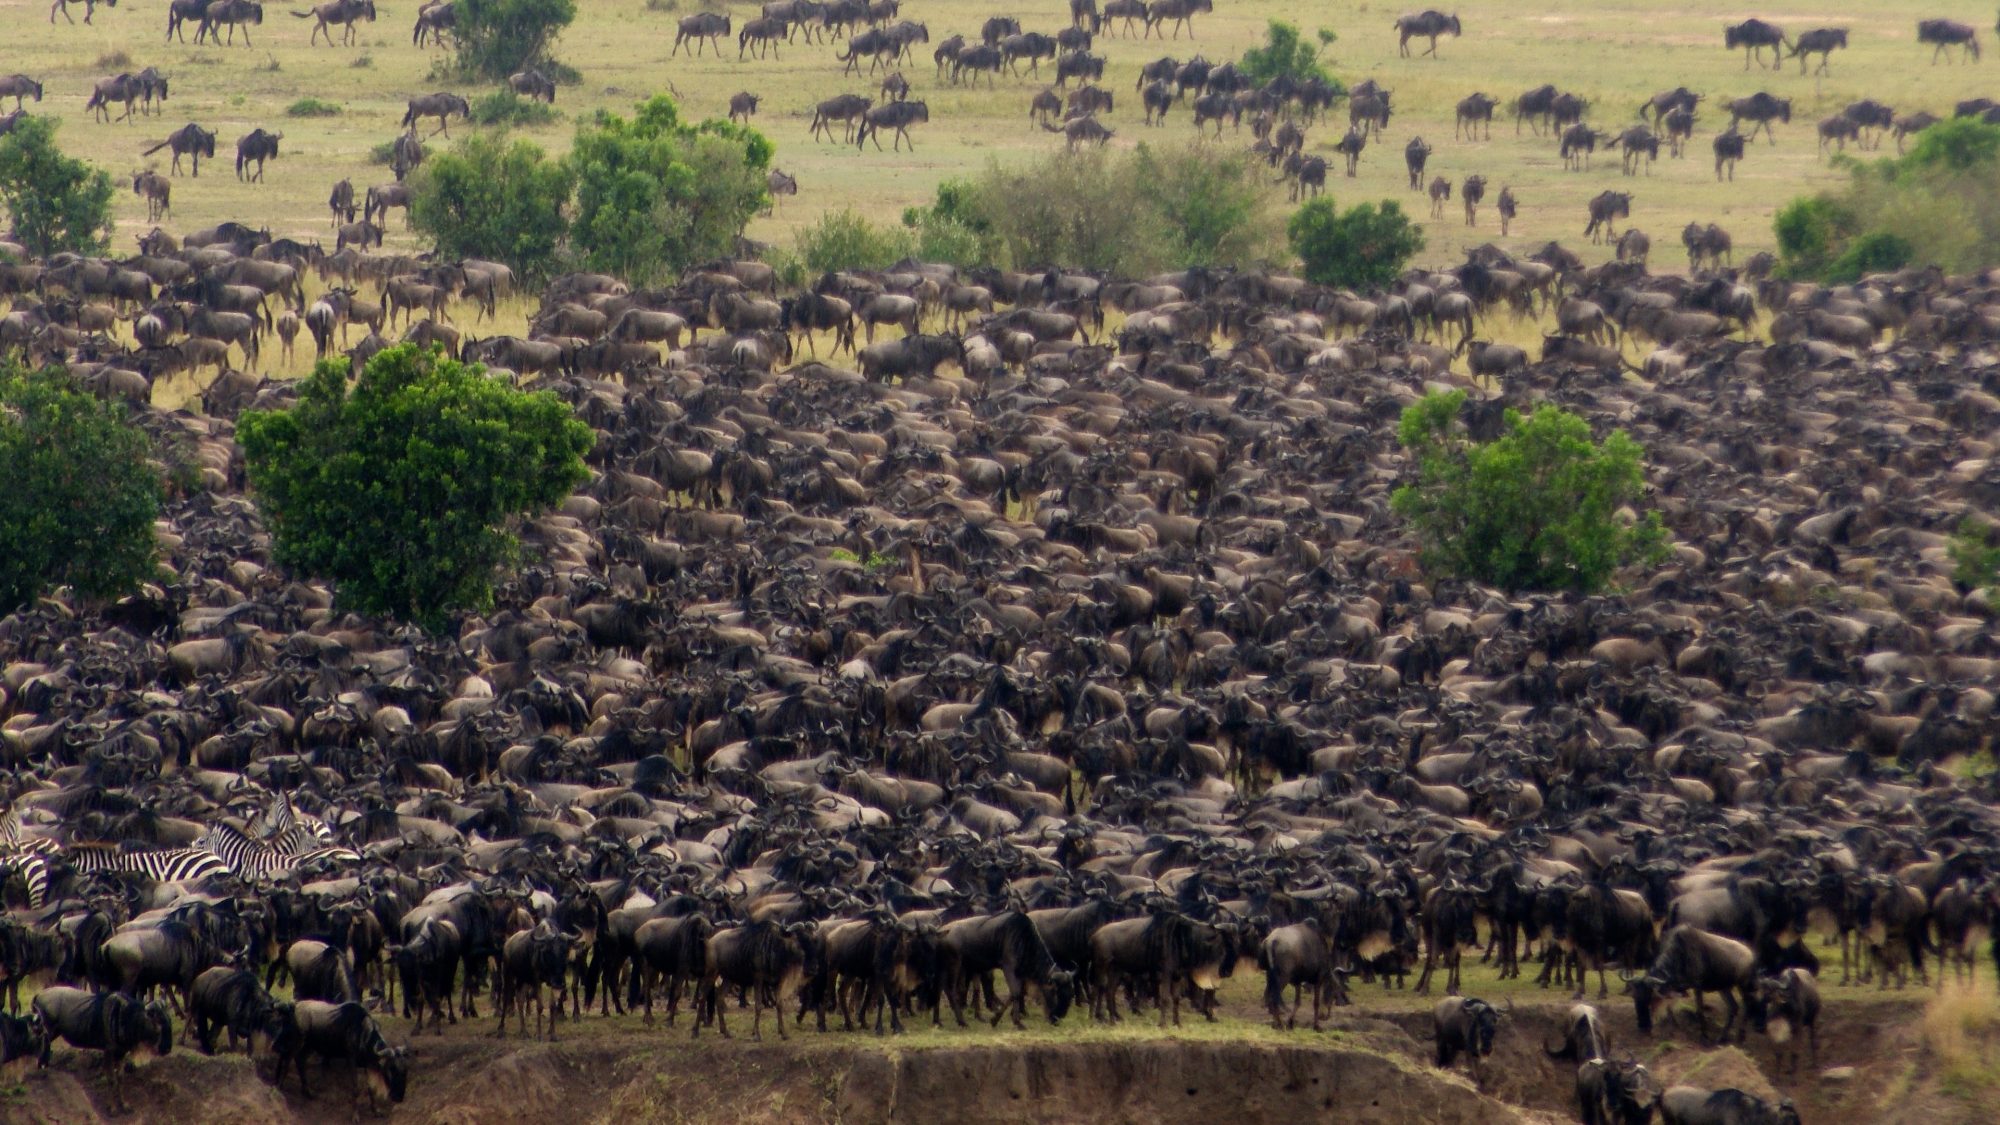 The great migration: Wildebeest crossing the Mara river – Tanzania, 2019